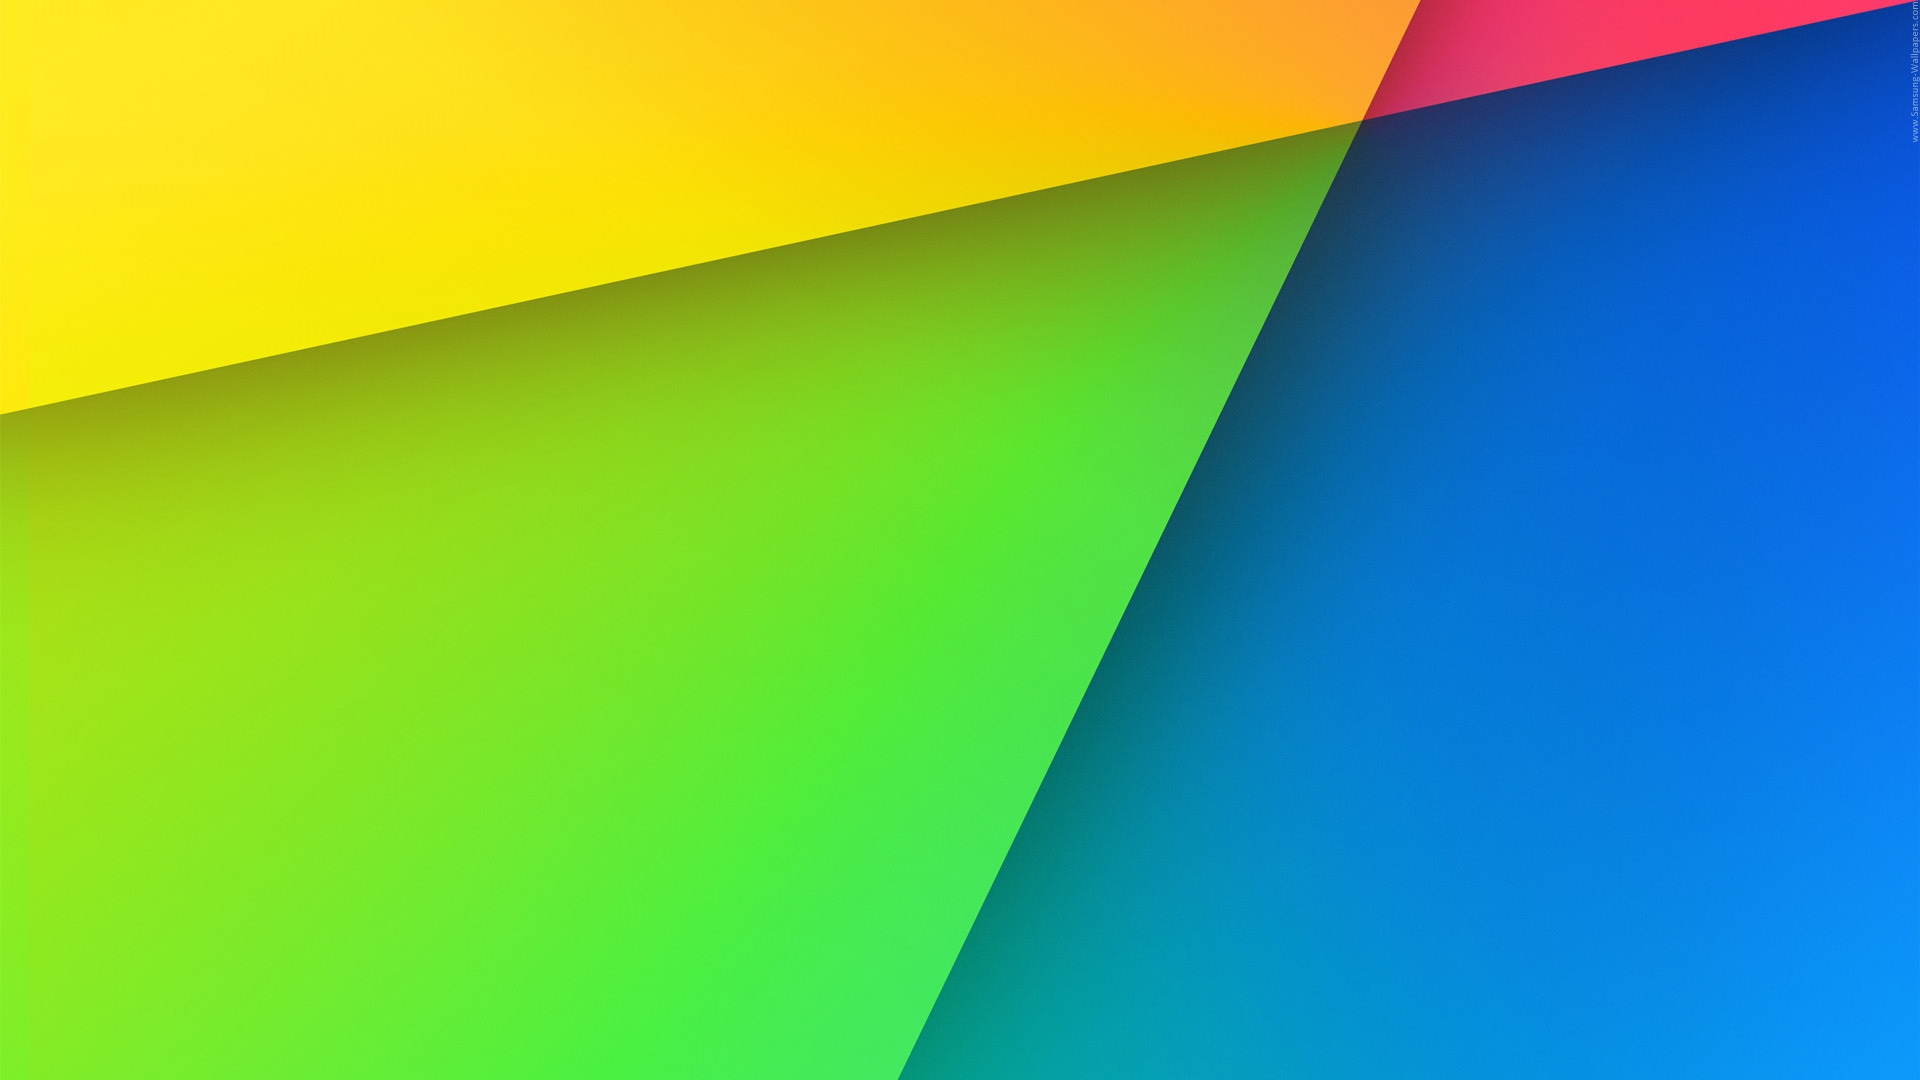 Android (operating System), Colorful, Simple, Minimalism, Nexus Wallpaper